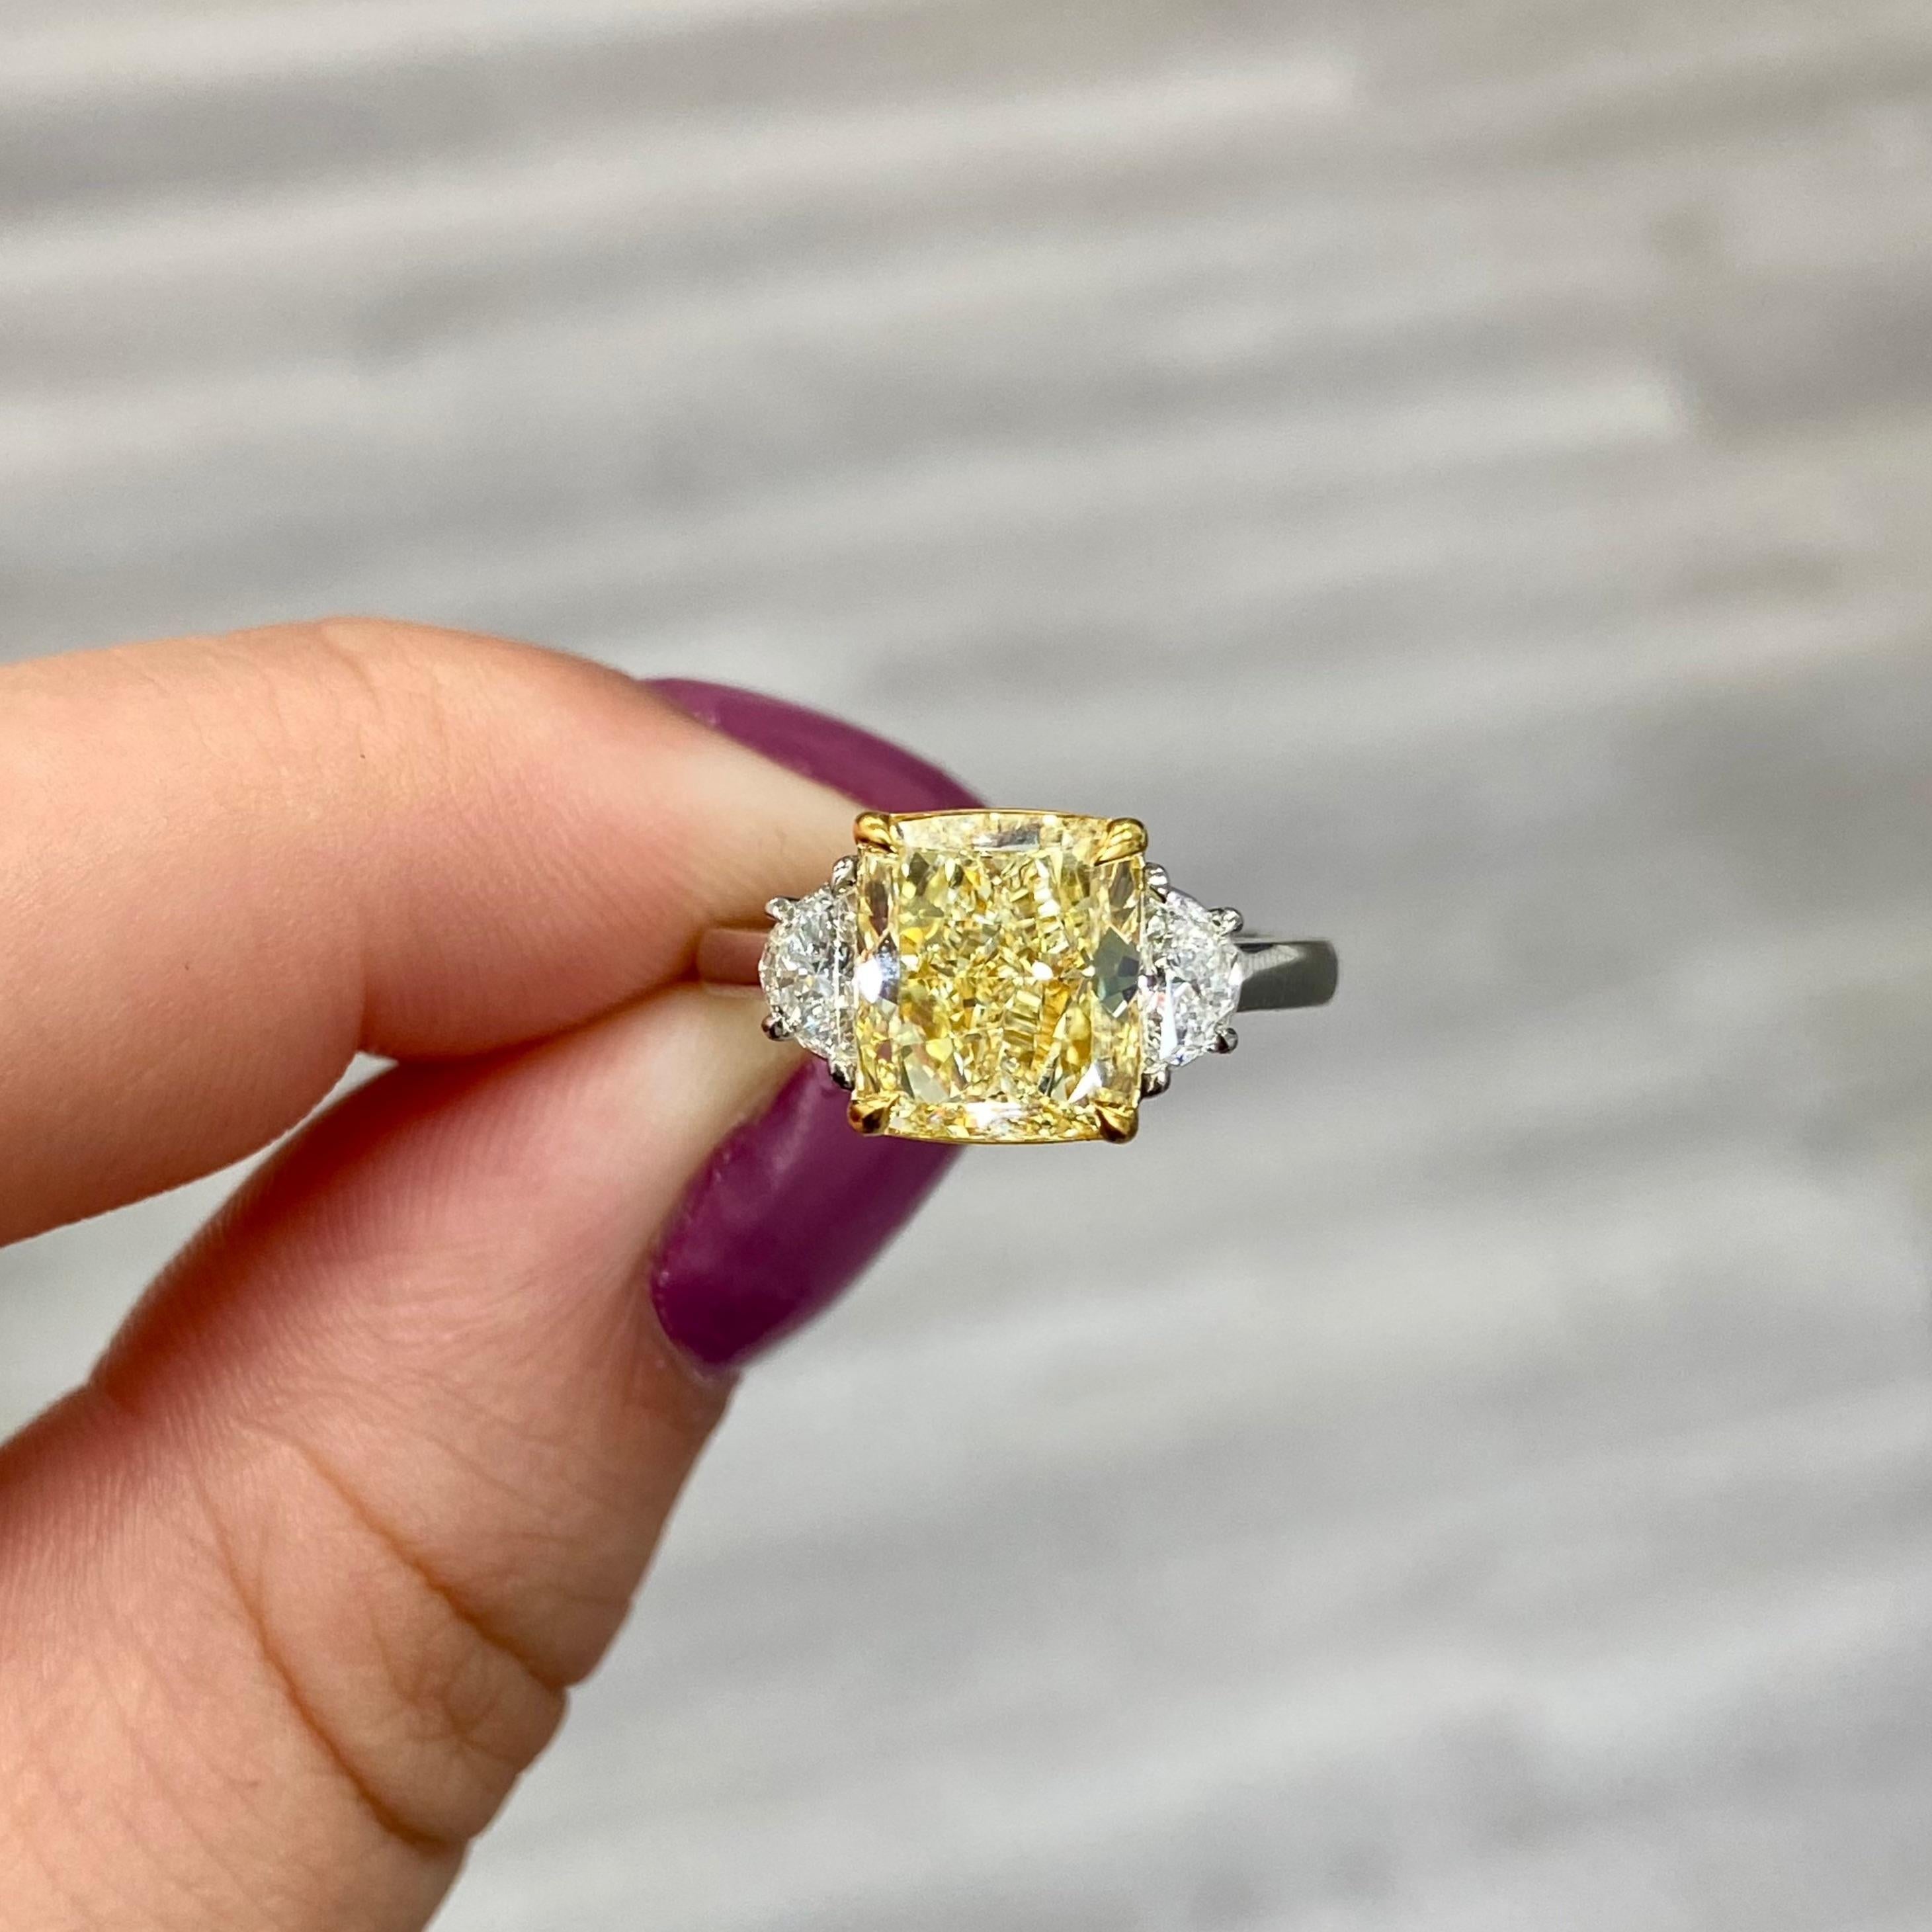 Well laid out and lively Fancy Yellow Cushion set in Platinum and 18kt Yellow Gold with 0.40ct of D VS Half Moons
Off square shape
